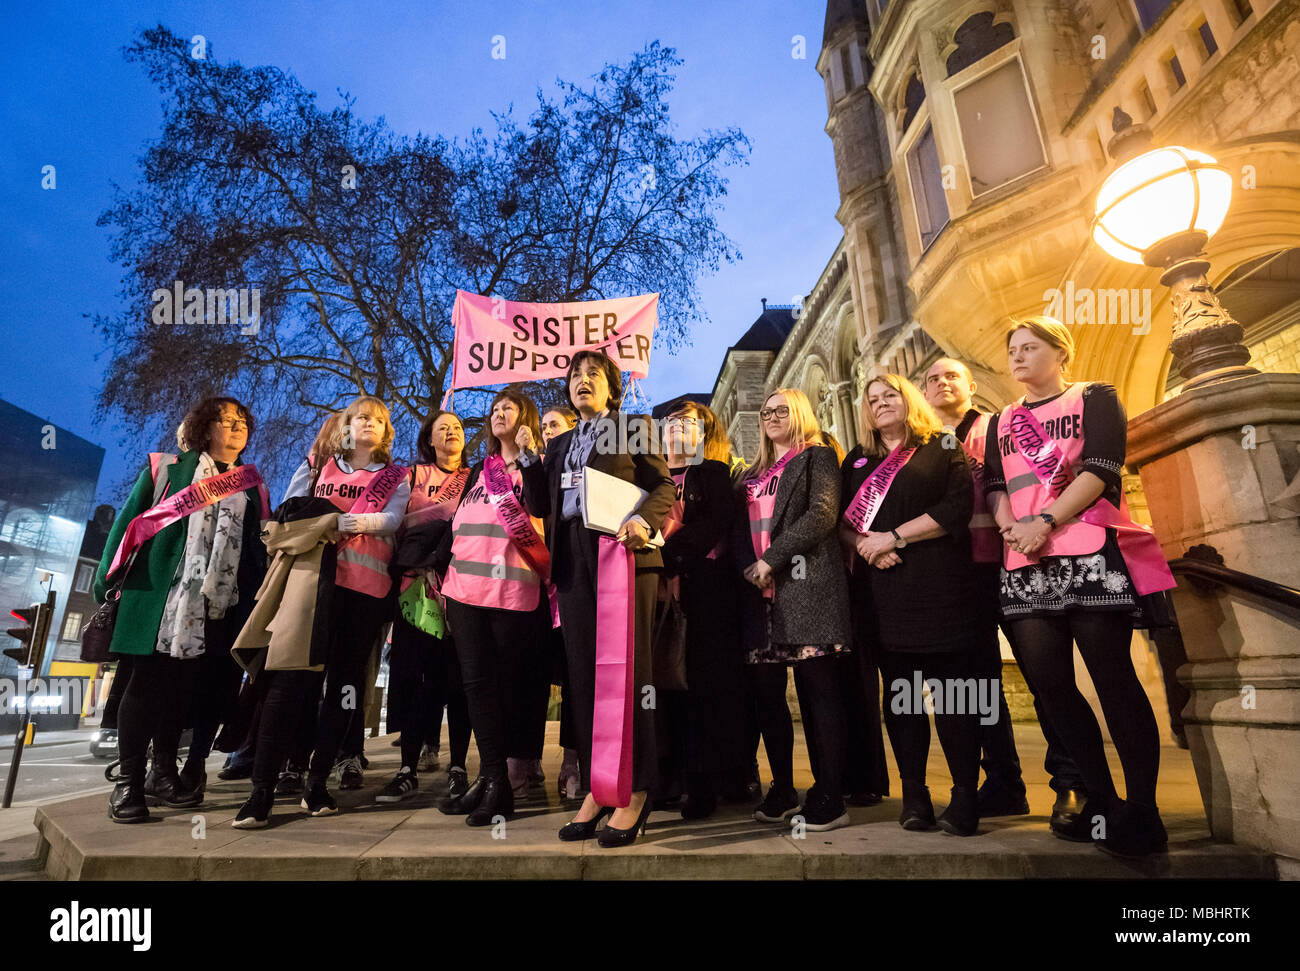 Ealing, West London, UK. 10th April 2018. Sister Supporter Pro-Choice protesters outside Ealing Town Hall on the day Ealing Council cabinet members voted to decide on the UK's first ever Public Space Protection Order (PSPO) safe zone outside the Marie Stopes health clinic. Credit: Guy Corbishley/Alamy Live News Stock Photo